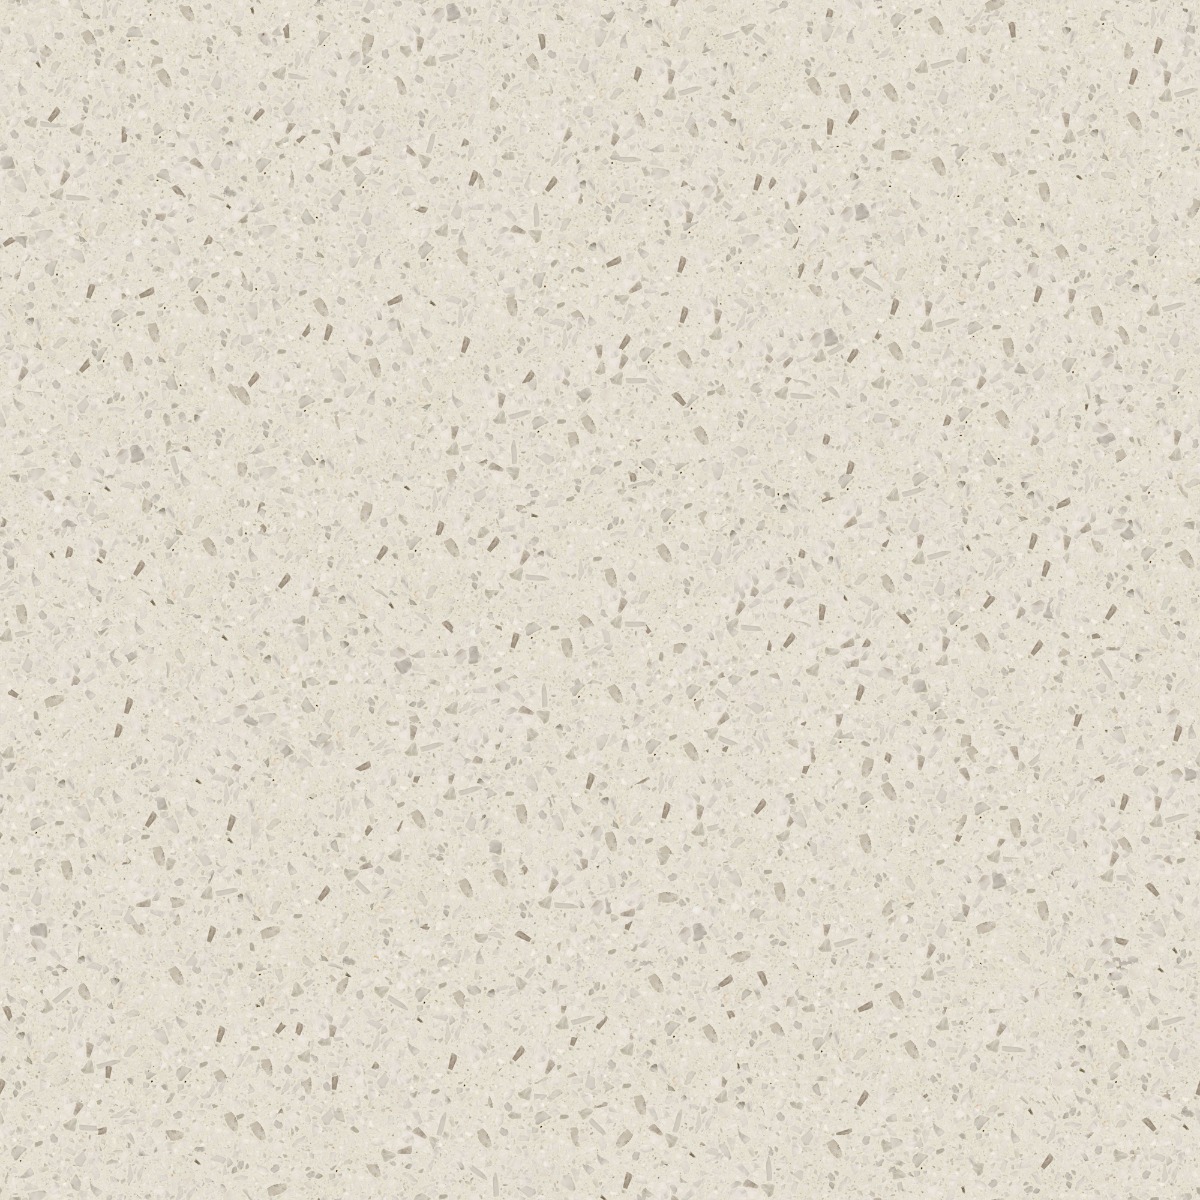 A seamless terrazzo texture with egat 143 terrazzo units arranged in a None pattern